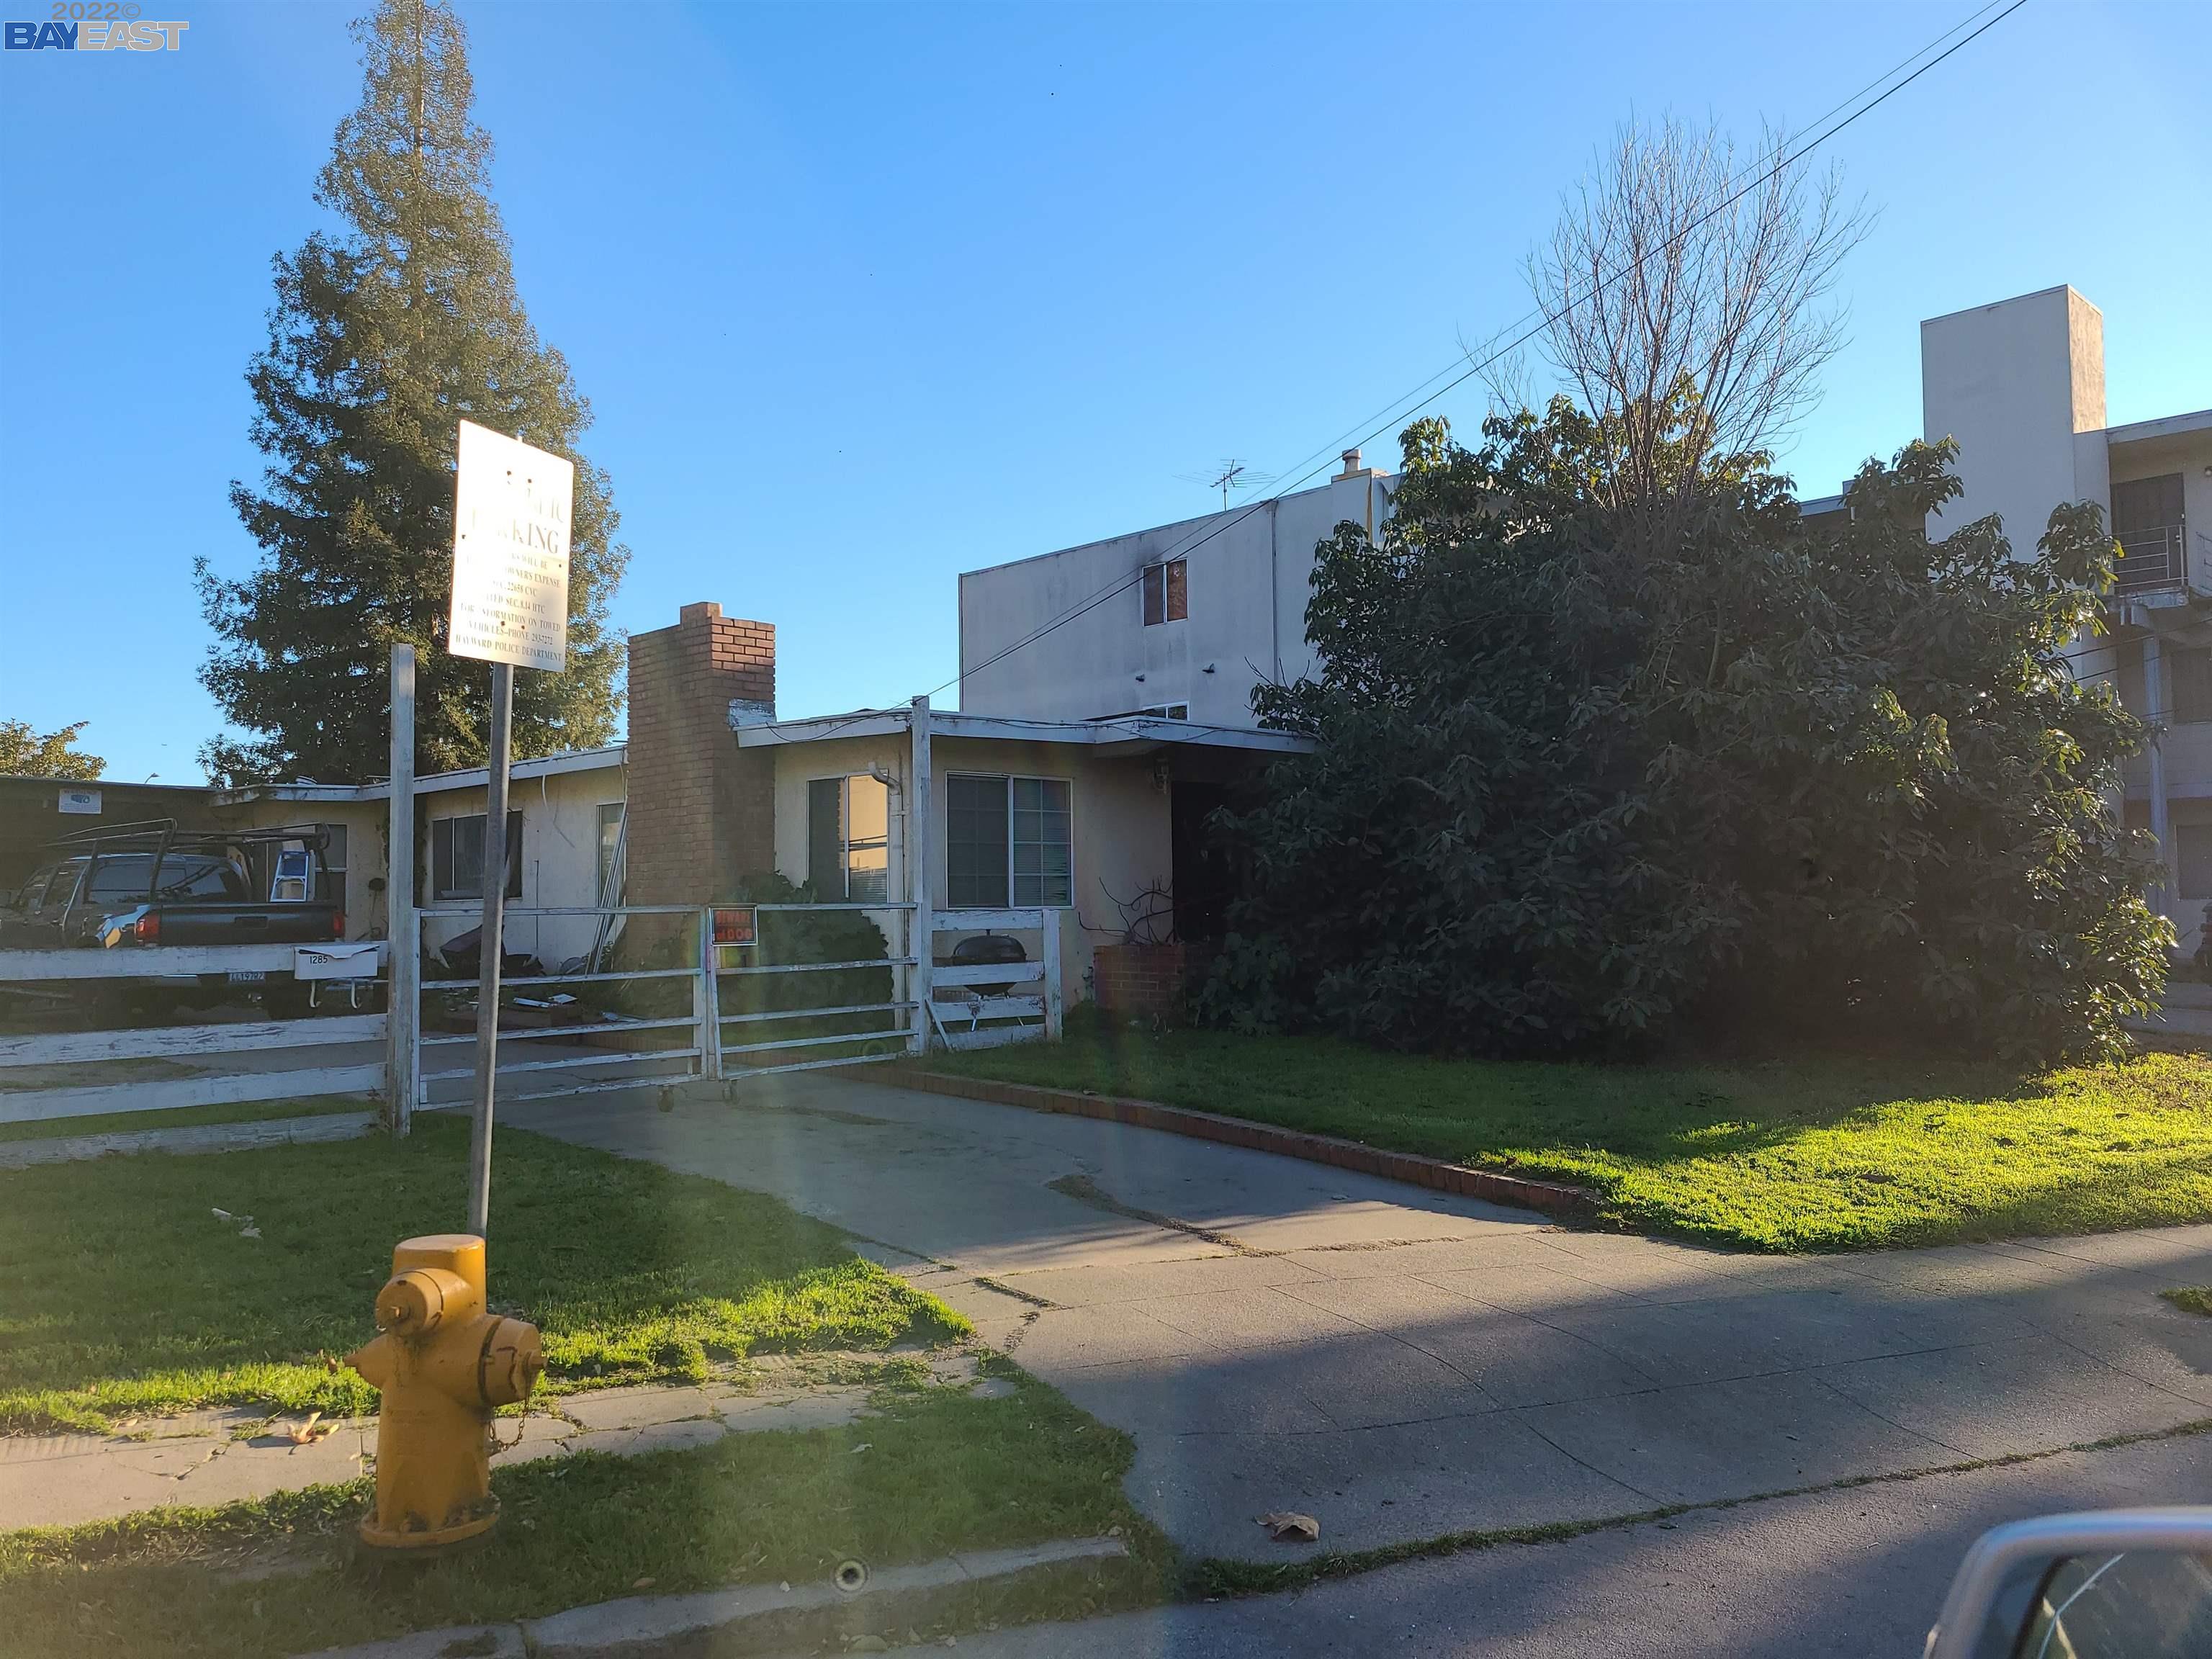 Photo of 1283 Russell Wy in Hayward, CA